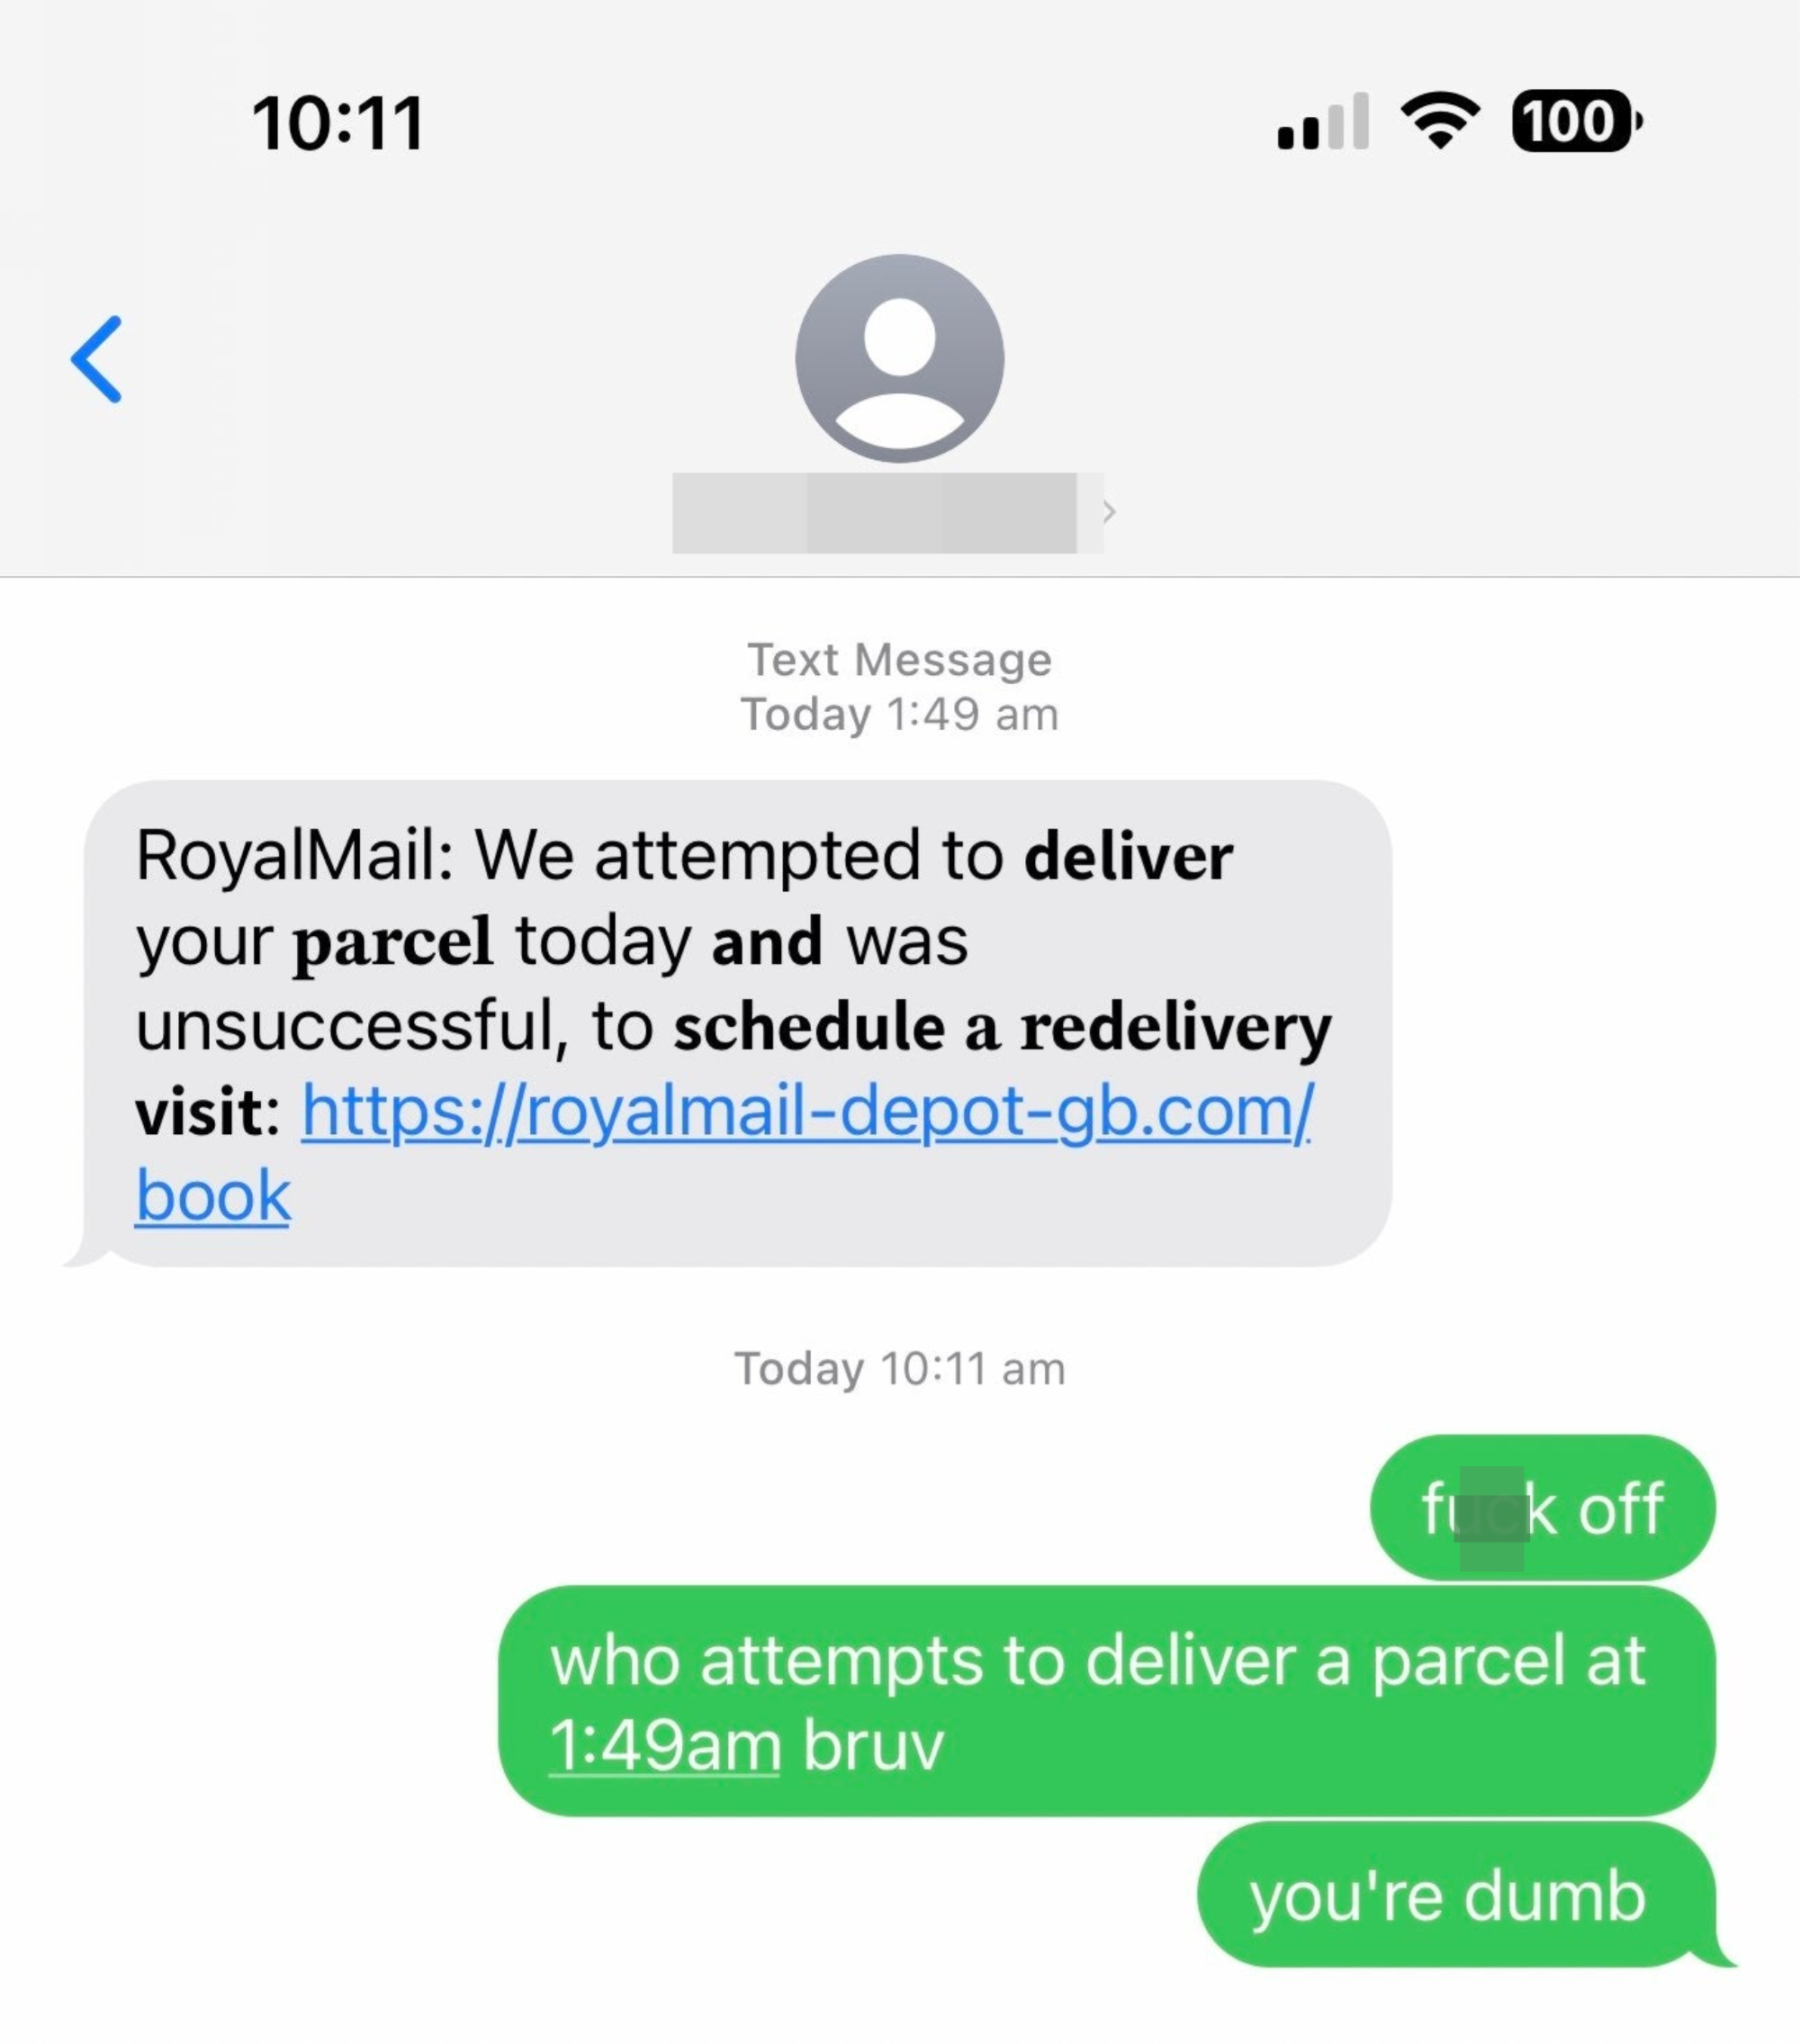 &quot;RoyalMail: We attempted to deliver your parcel today and was unsuccessful,&quot; person says &quot;Fuck of, who attempts to deliver a parcel at 1:45am bruv, you&#x27;re dumb&quot;